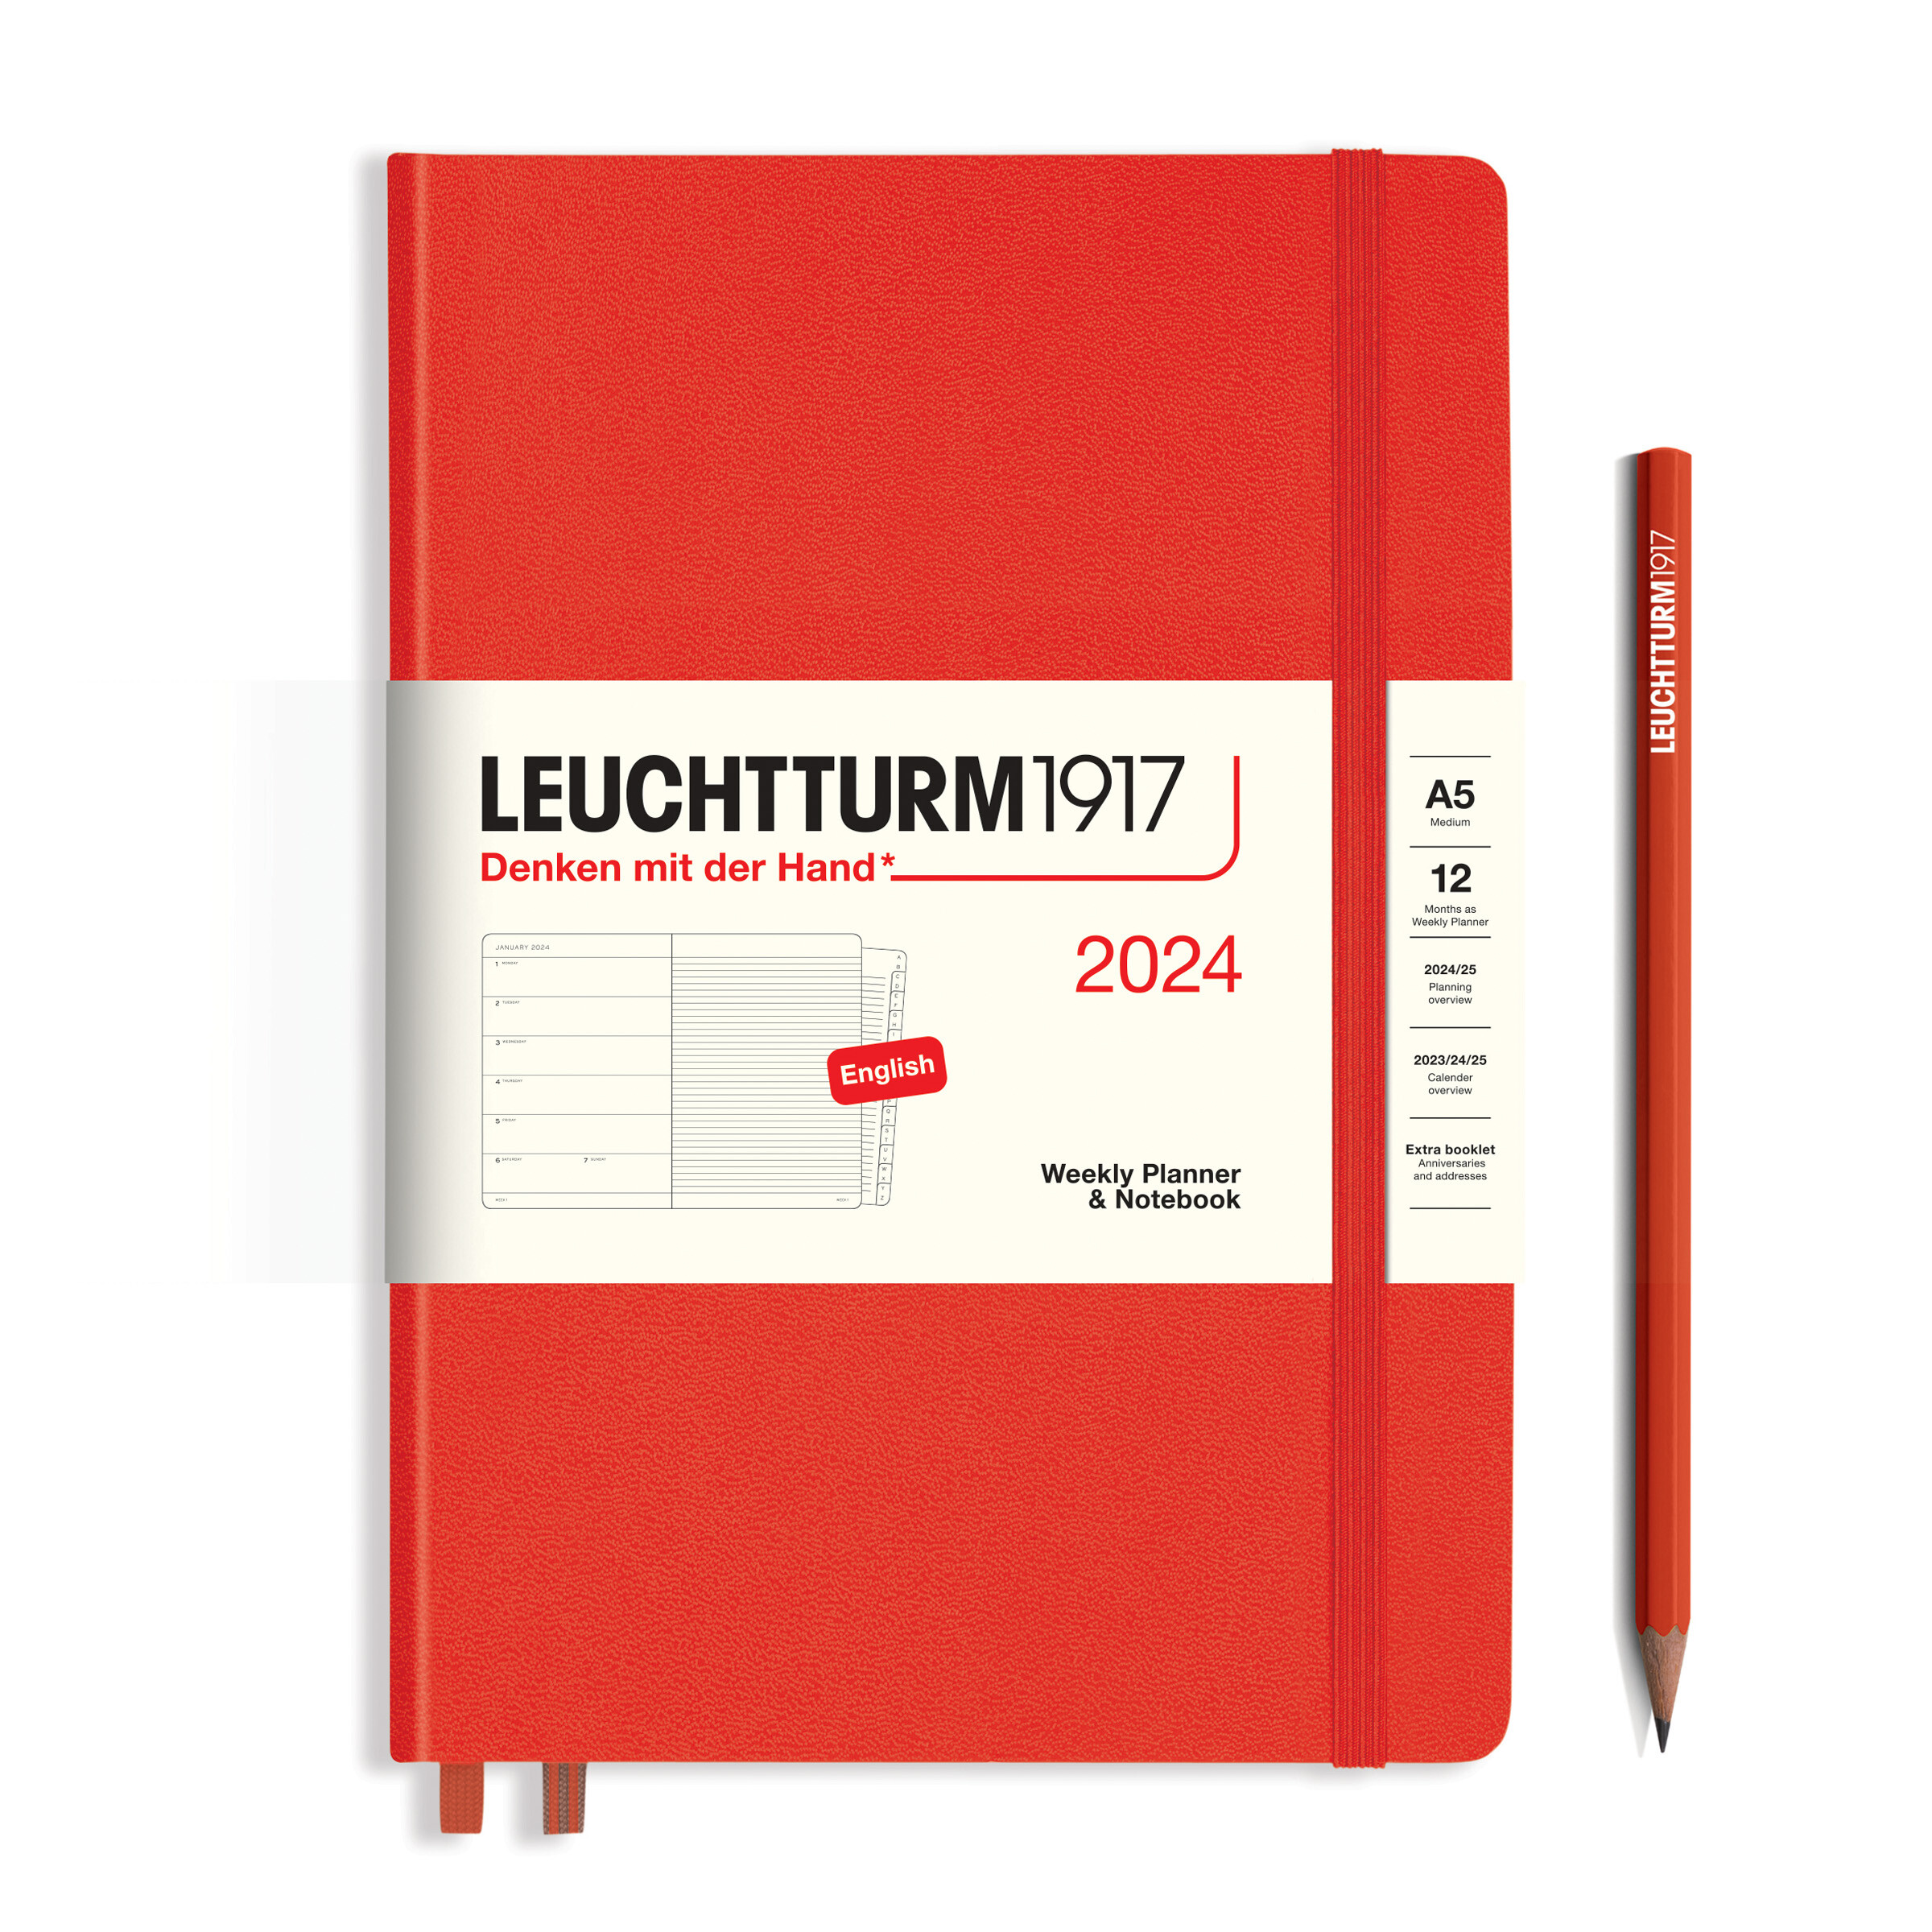 Leuchtturm1917 Weekly Planner & Notebook Hard Cover Medium A5 2024 - Pencraft the boutique